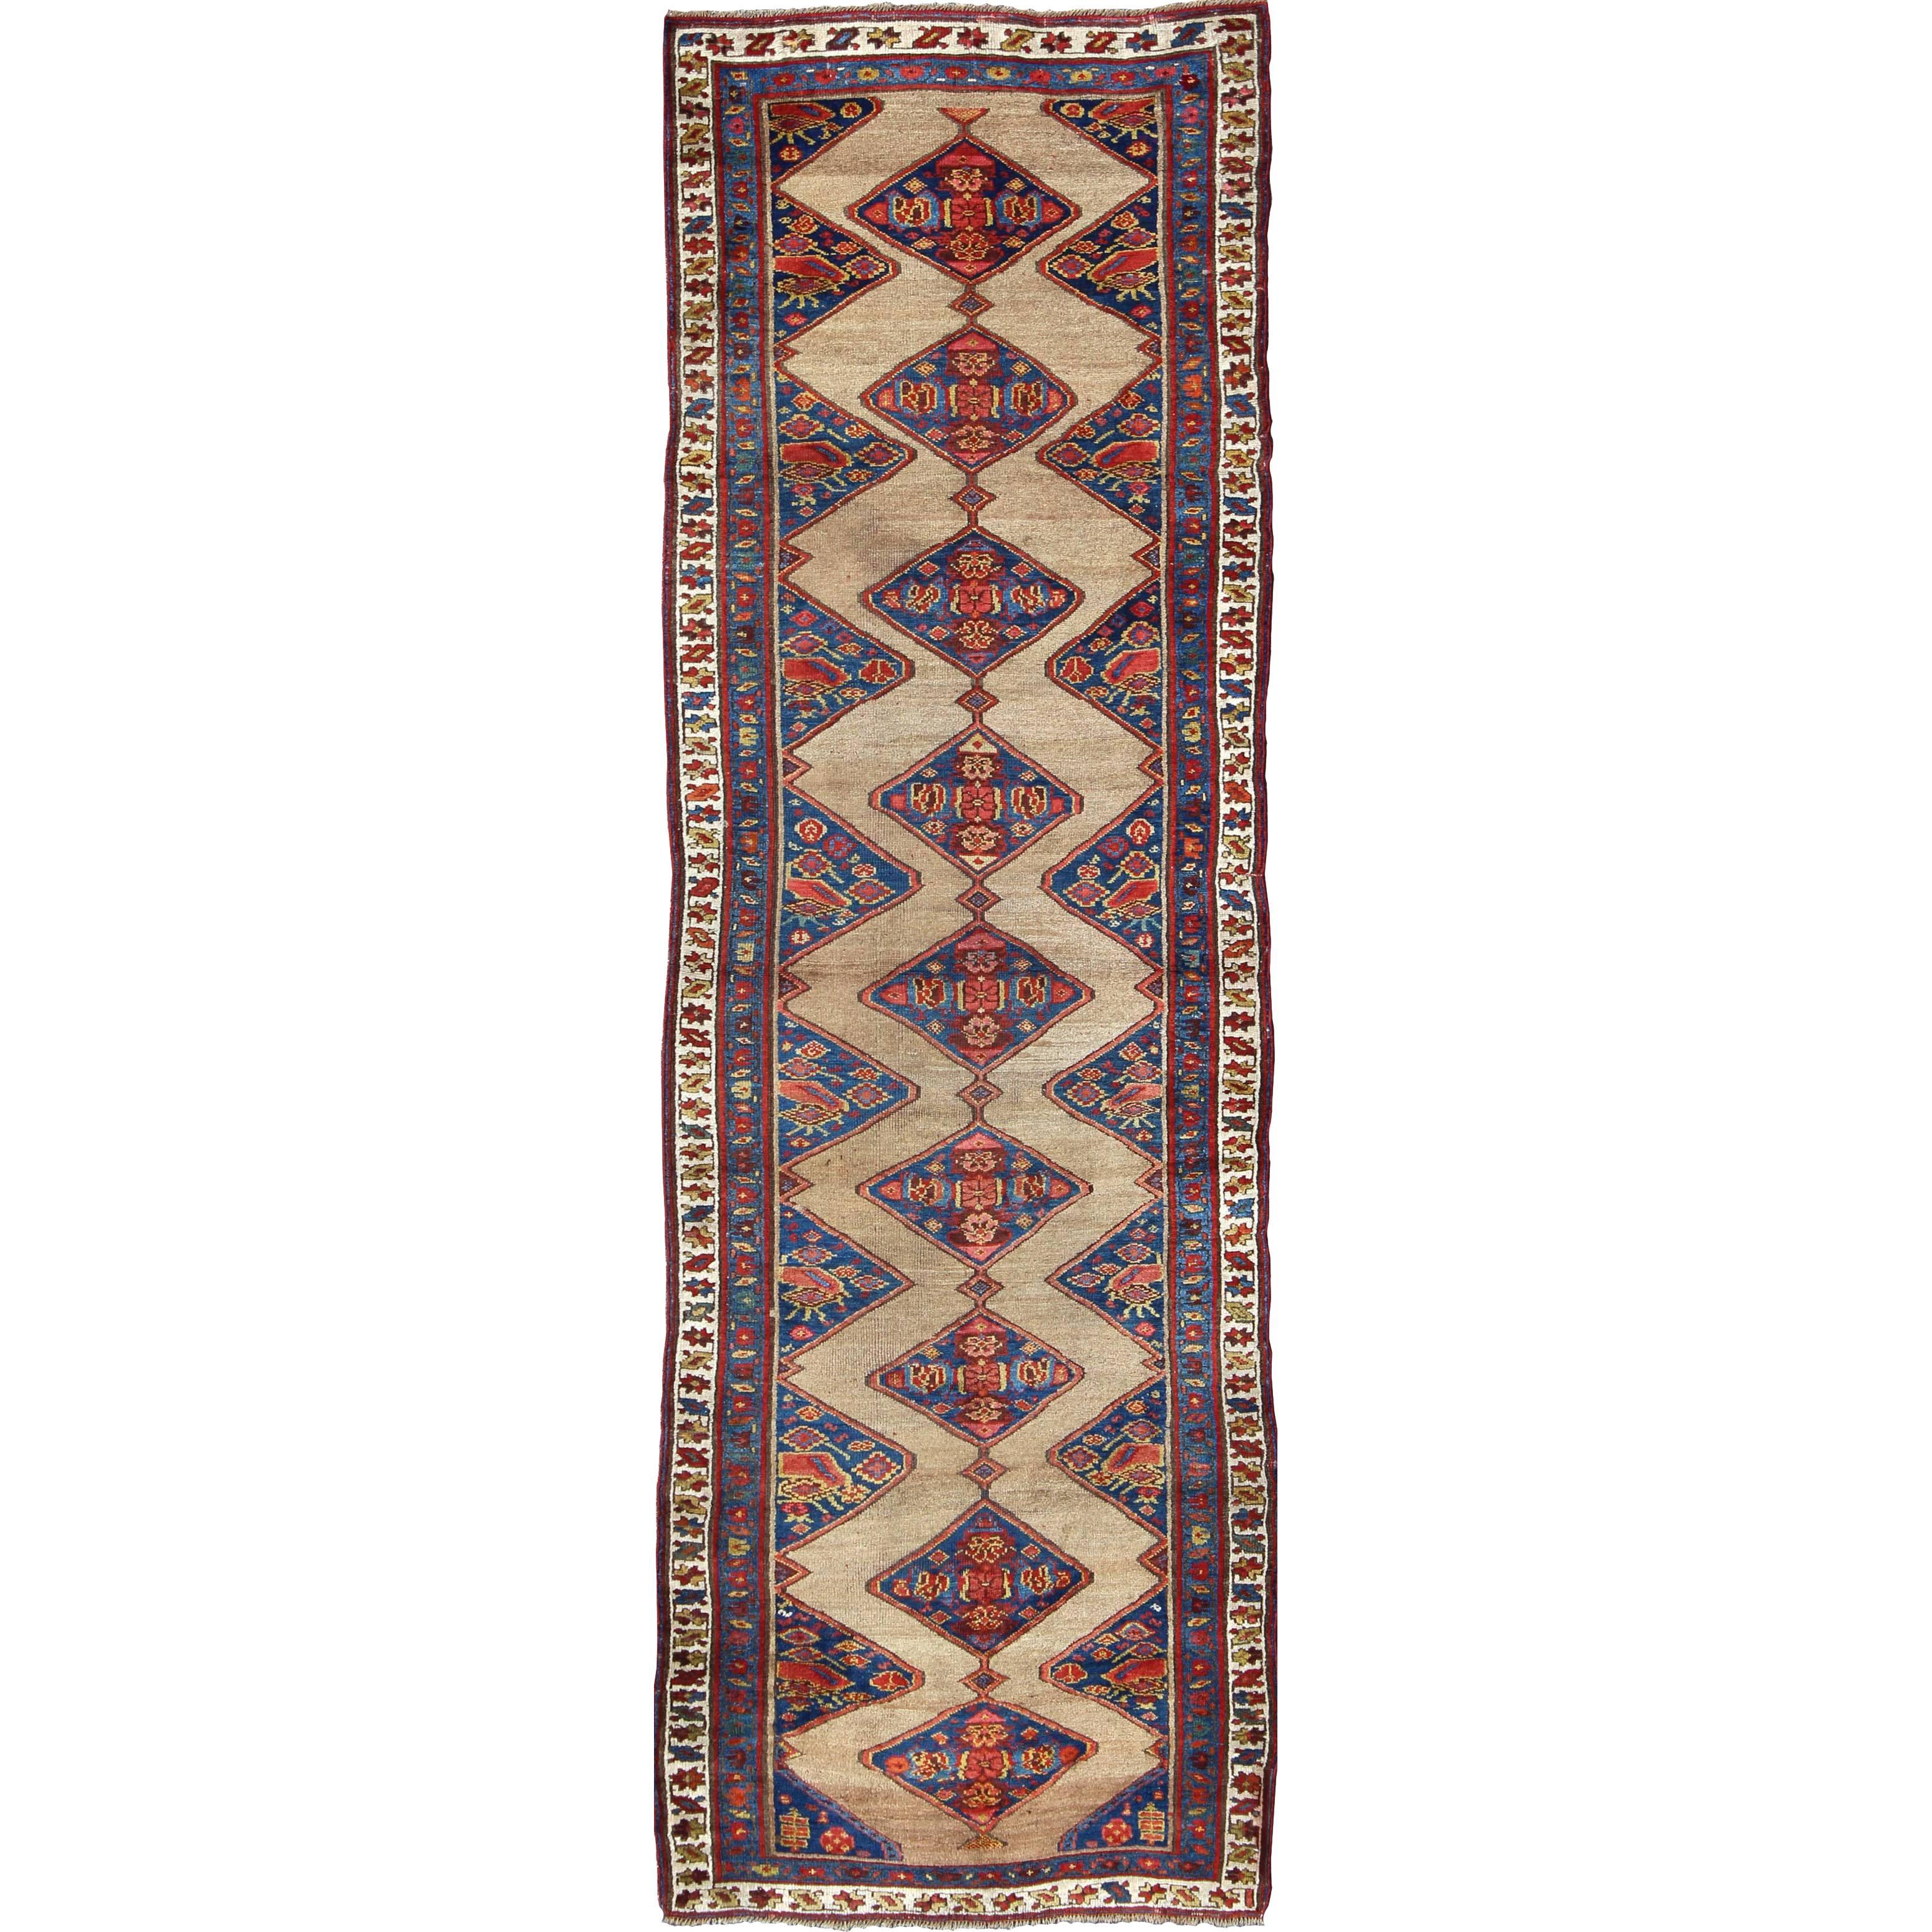 Colorful Long Antique Persian Serab Runner with Camel, Blue, Red and Brown